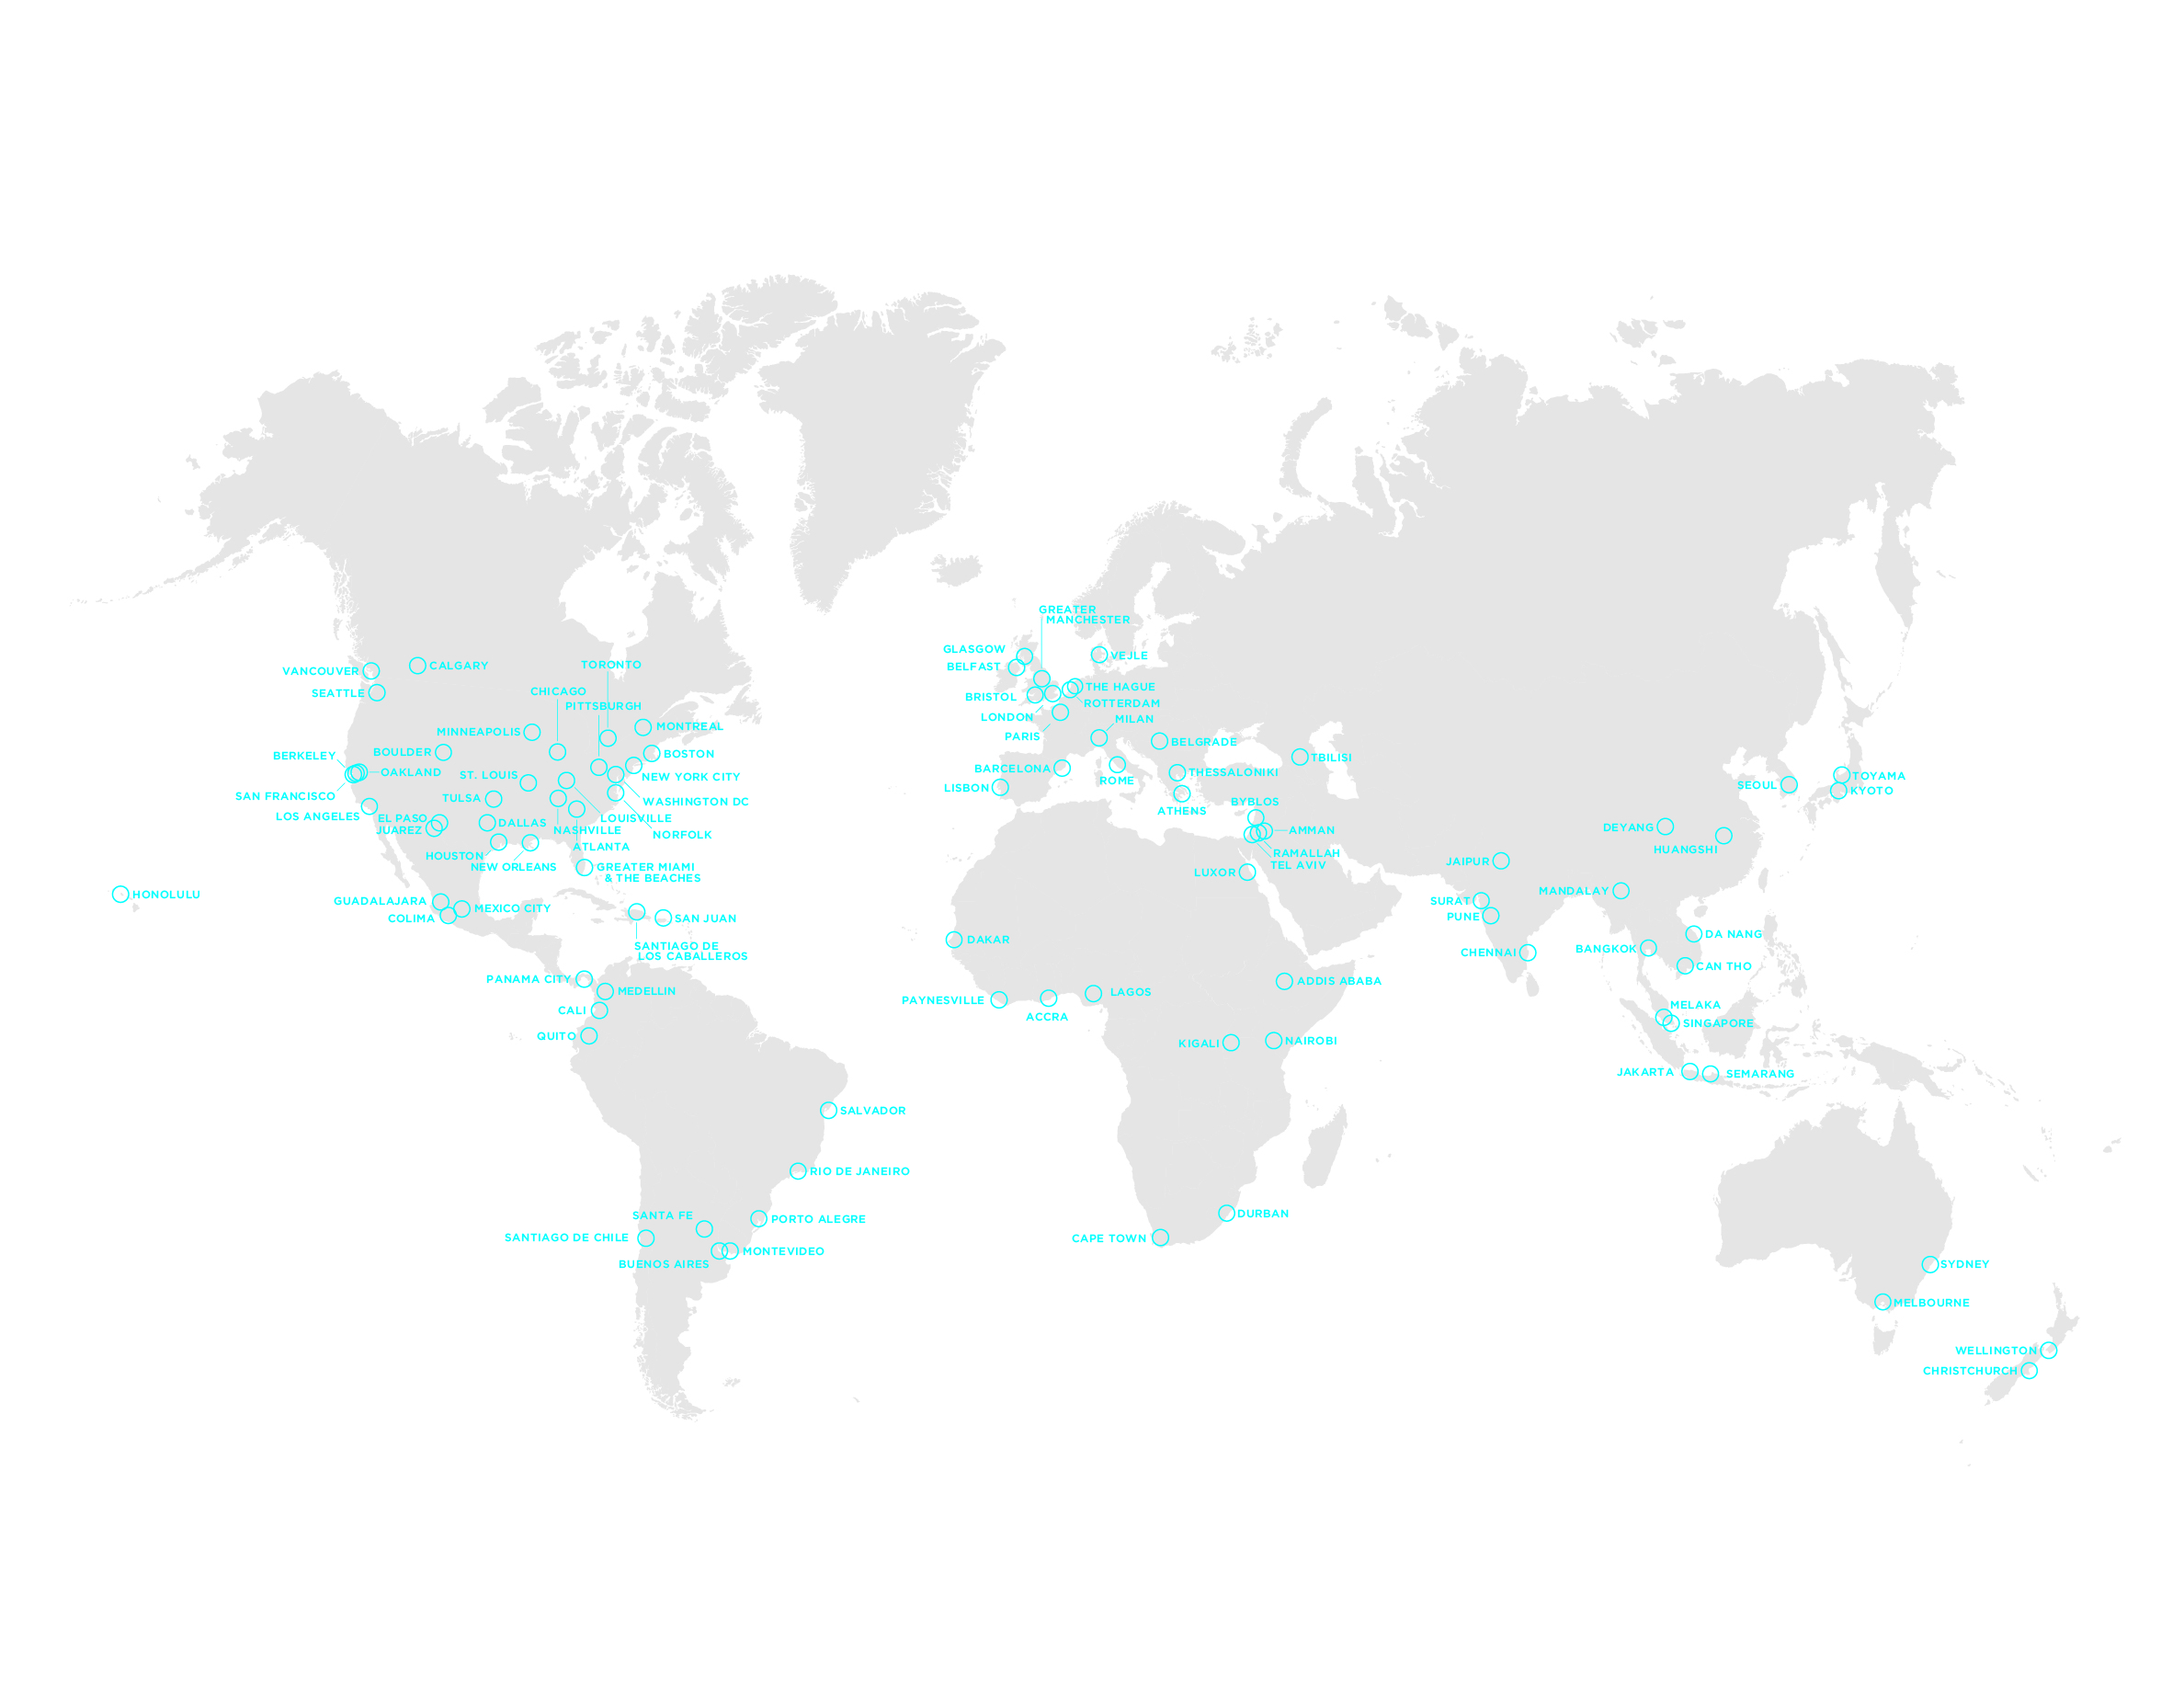 A map of the 100 Resilient Cities. See http://www.100resilientcities.org/cities/ for the full list